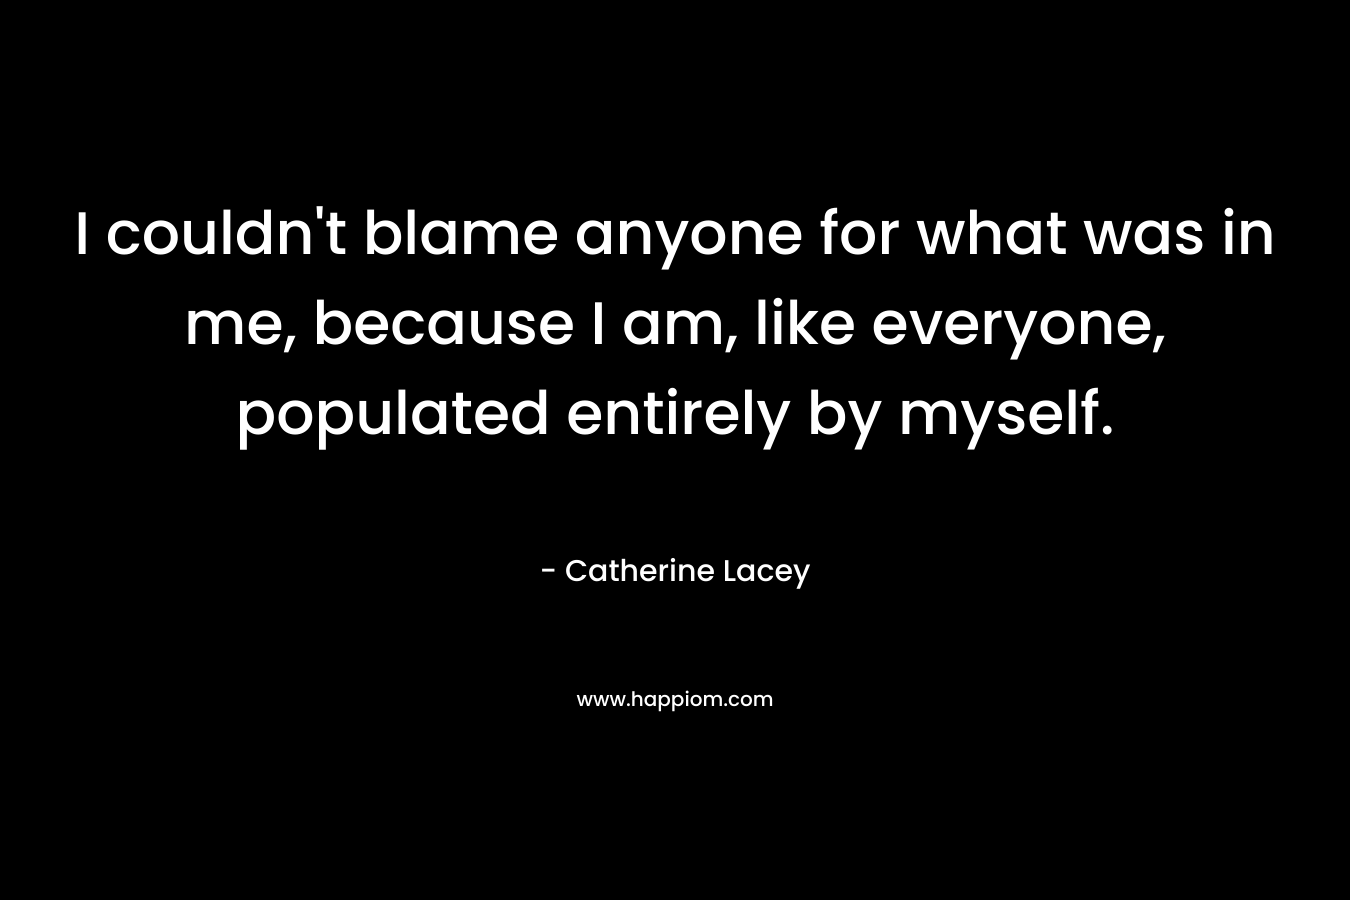 I couldn’t blame anyone for what was in me, because I am, like everyone, populated entirely by myself. – Catherine Lacey